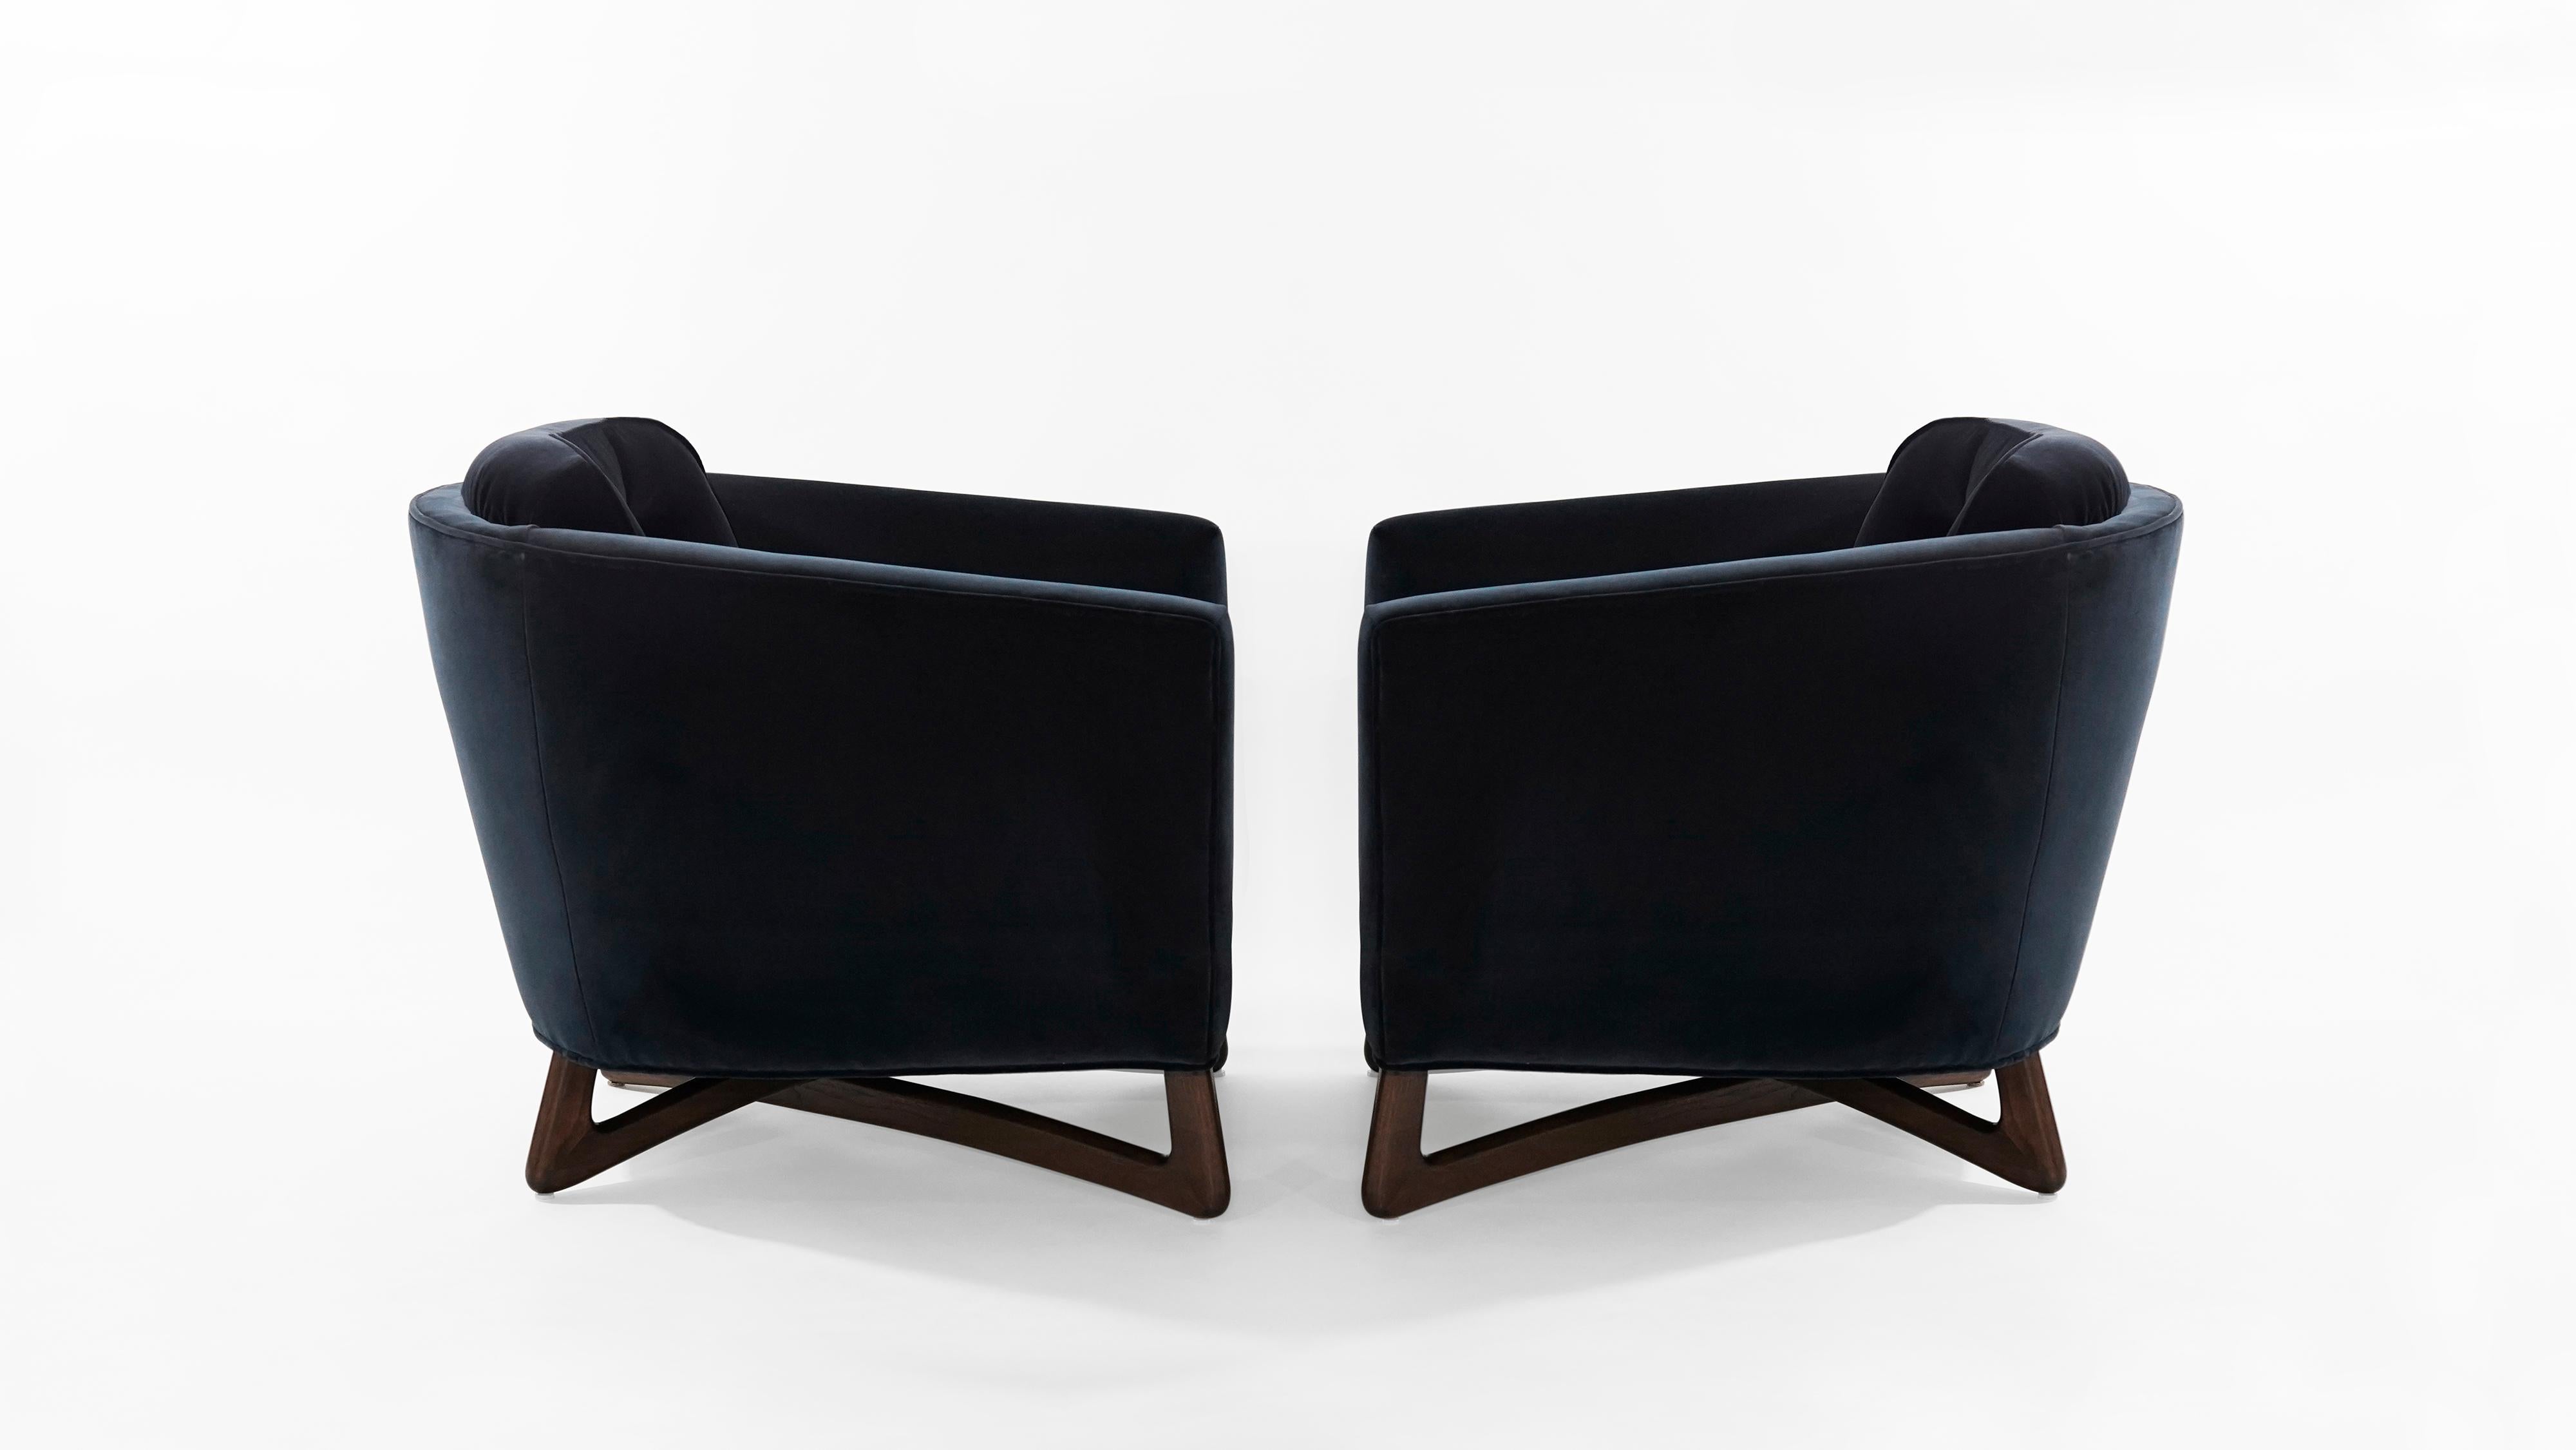 Set of lounge chairs designed by Adrian Pearsall for Craft Associates, circa 1950s.

Sculptural walnut bases fully restored, newly upholstered in great plains midnight velvet by Holly Hunt.